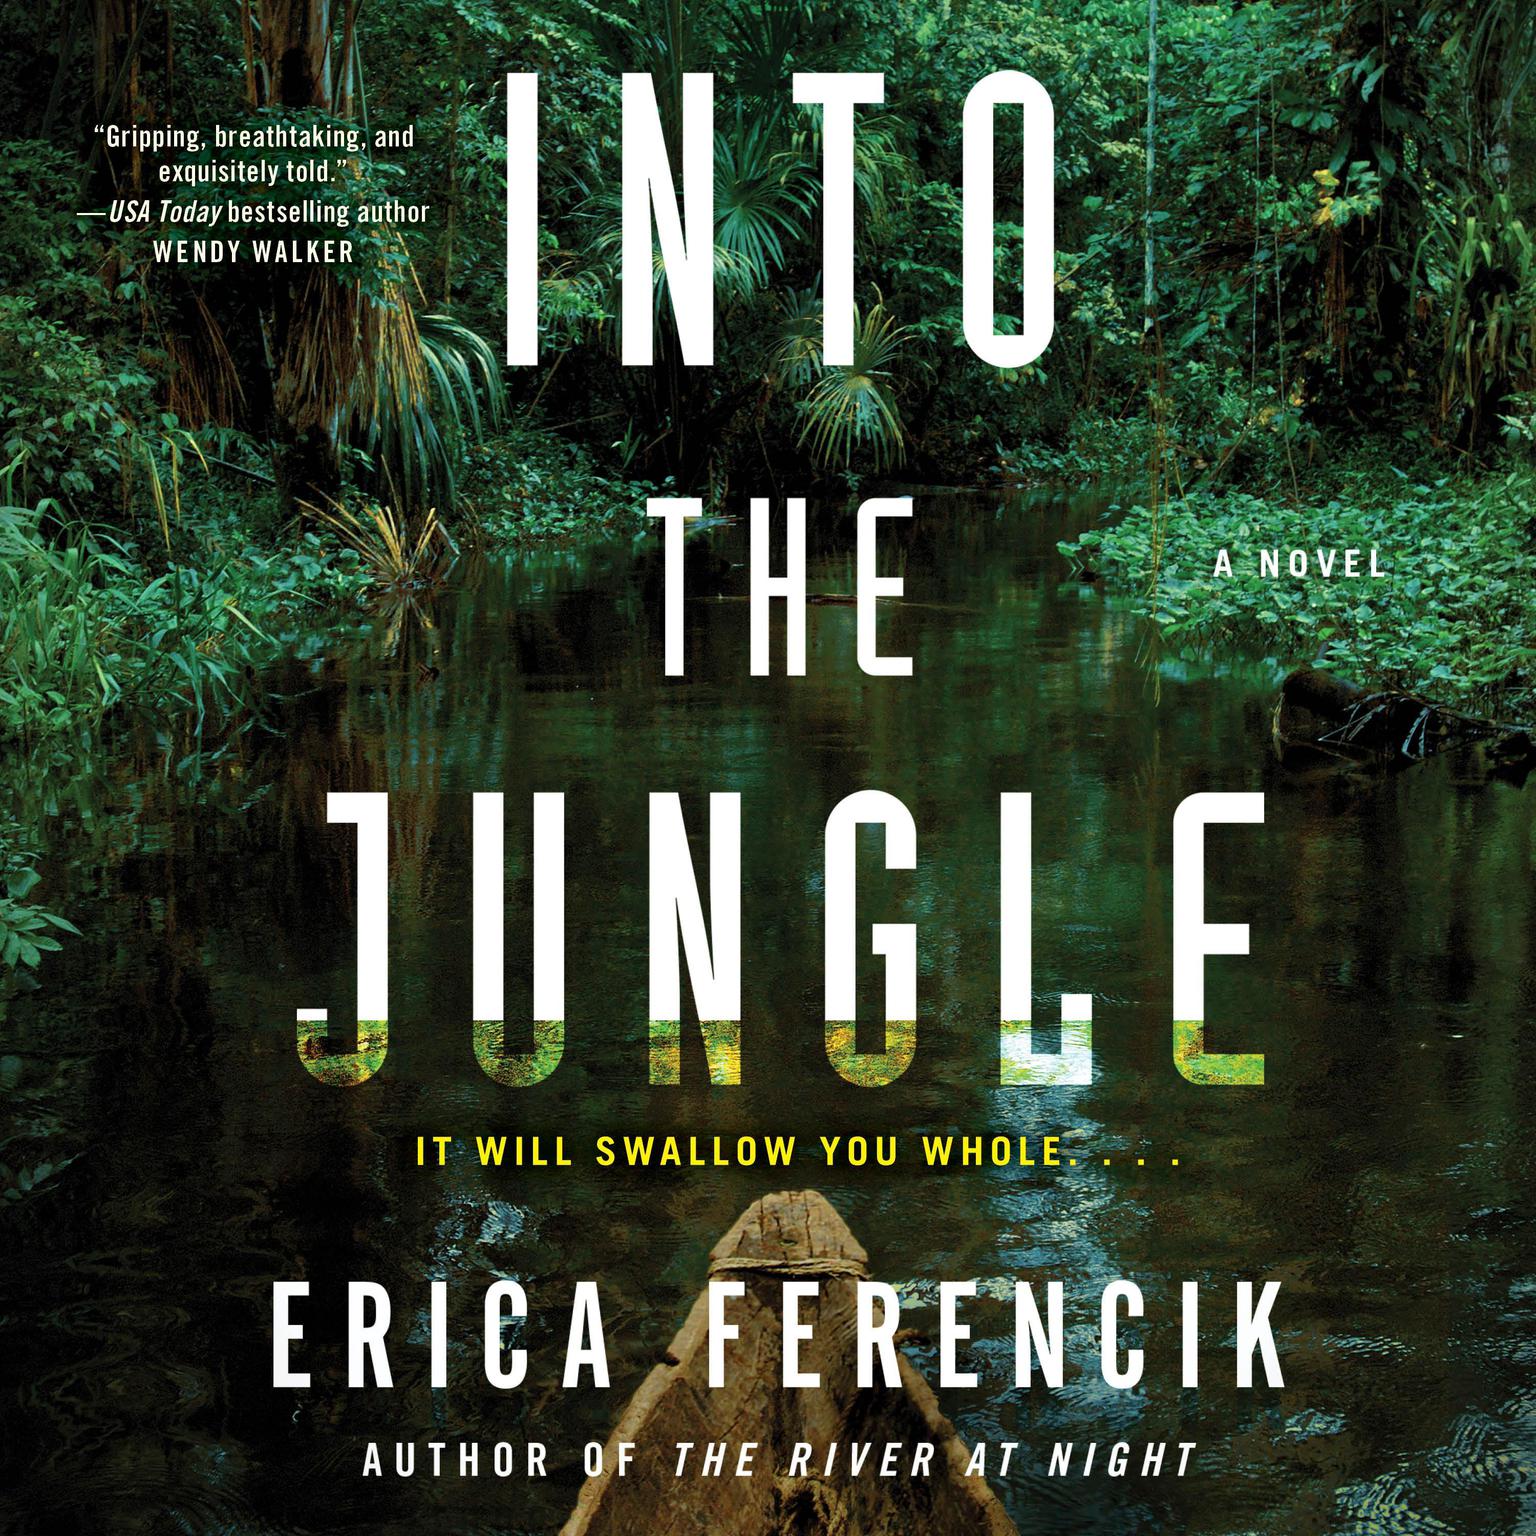 Into the Jungle Audiobook, by Erica Ferencik